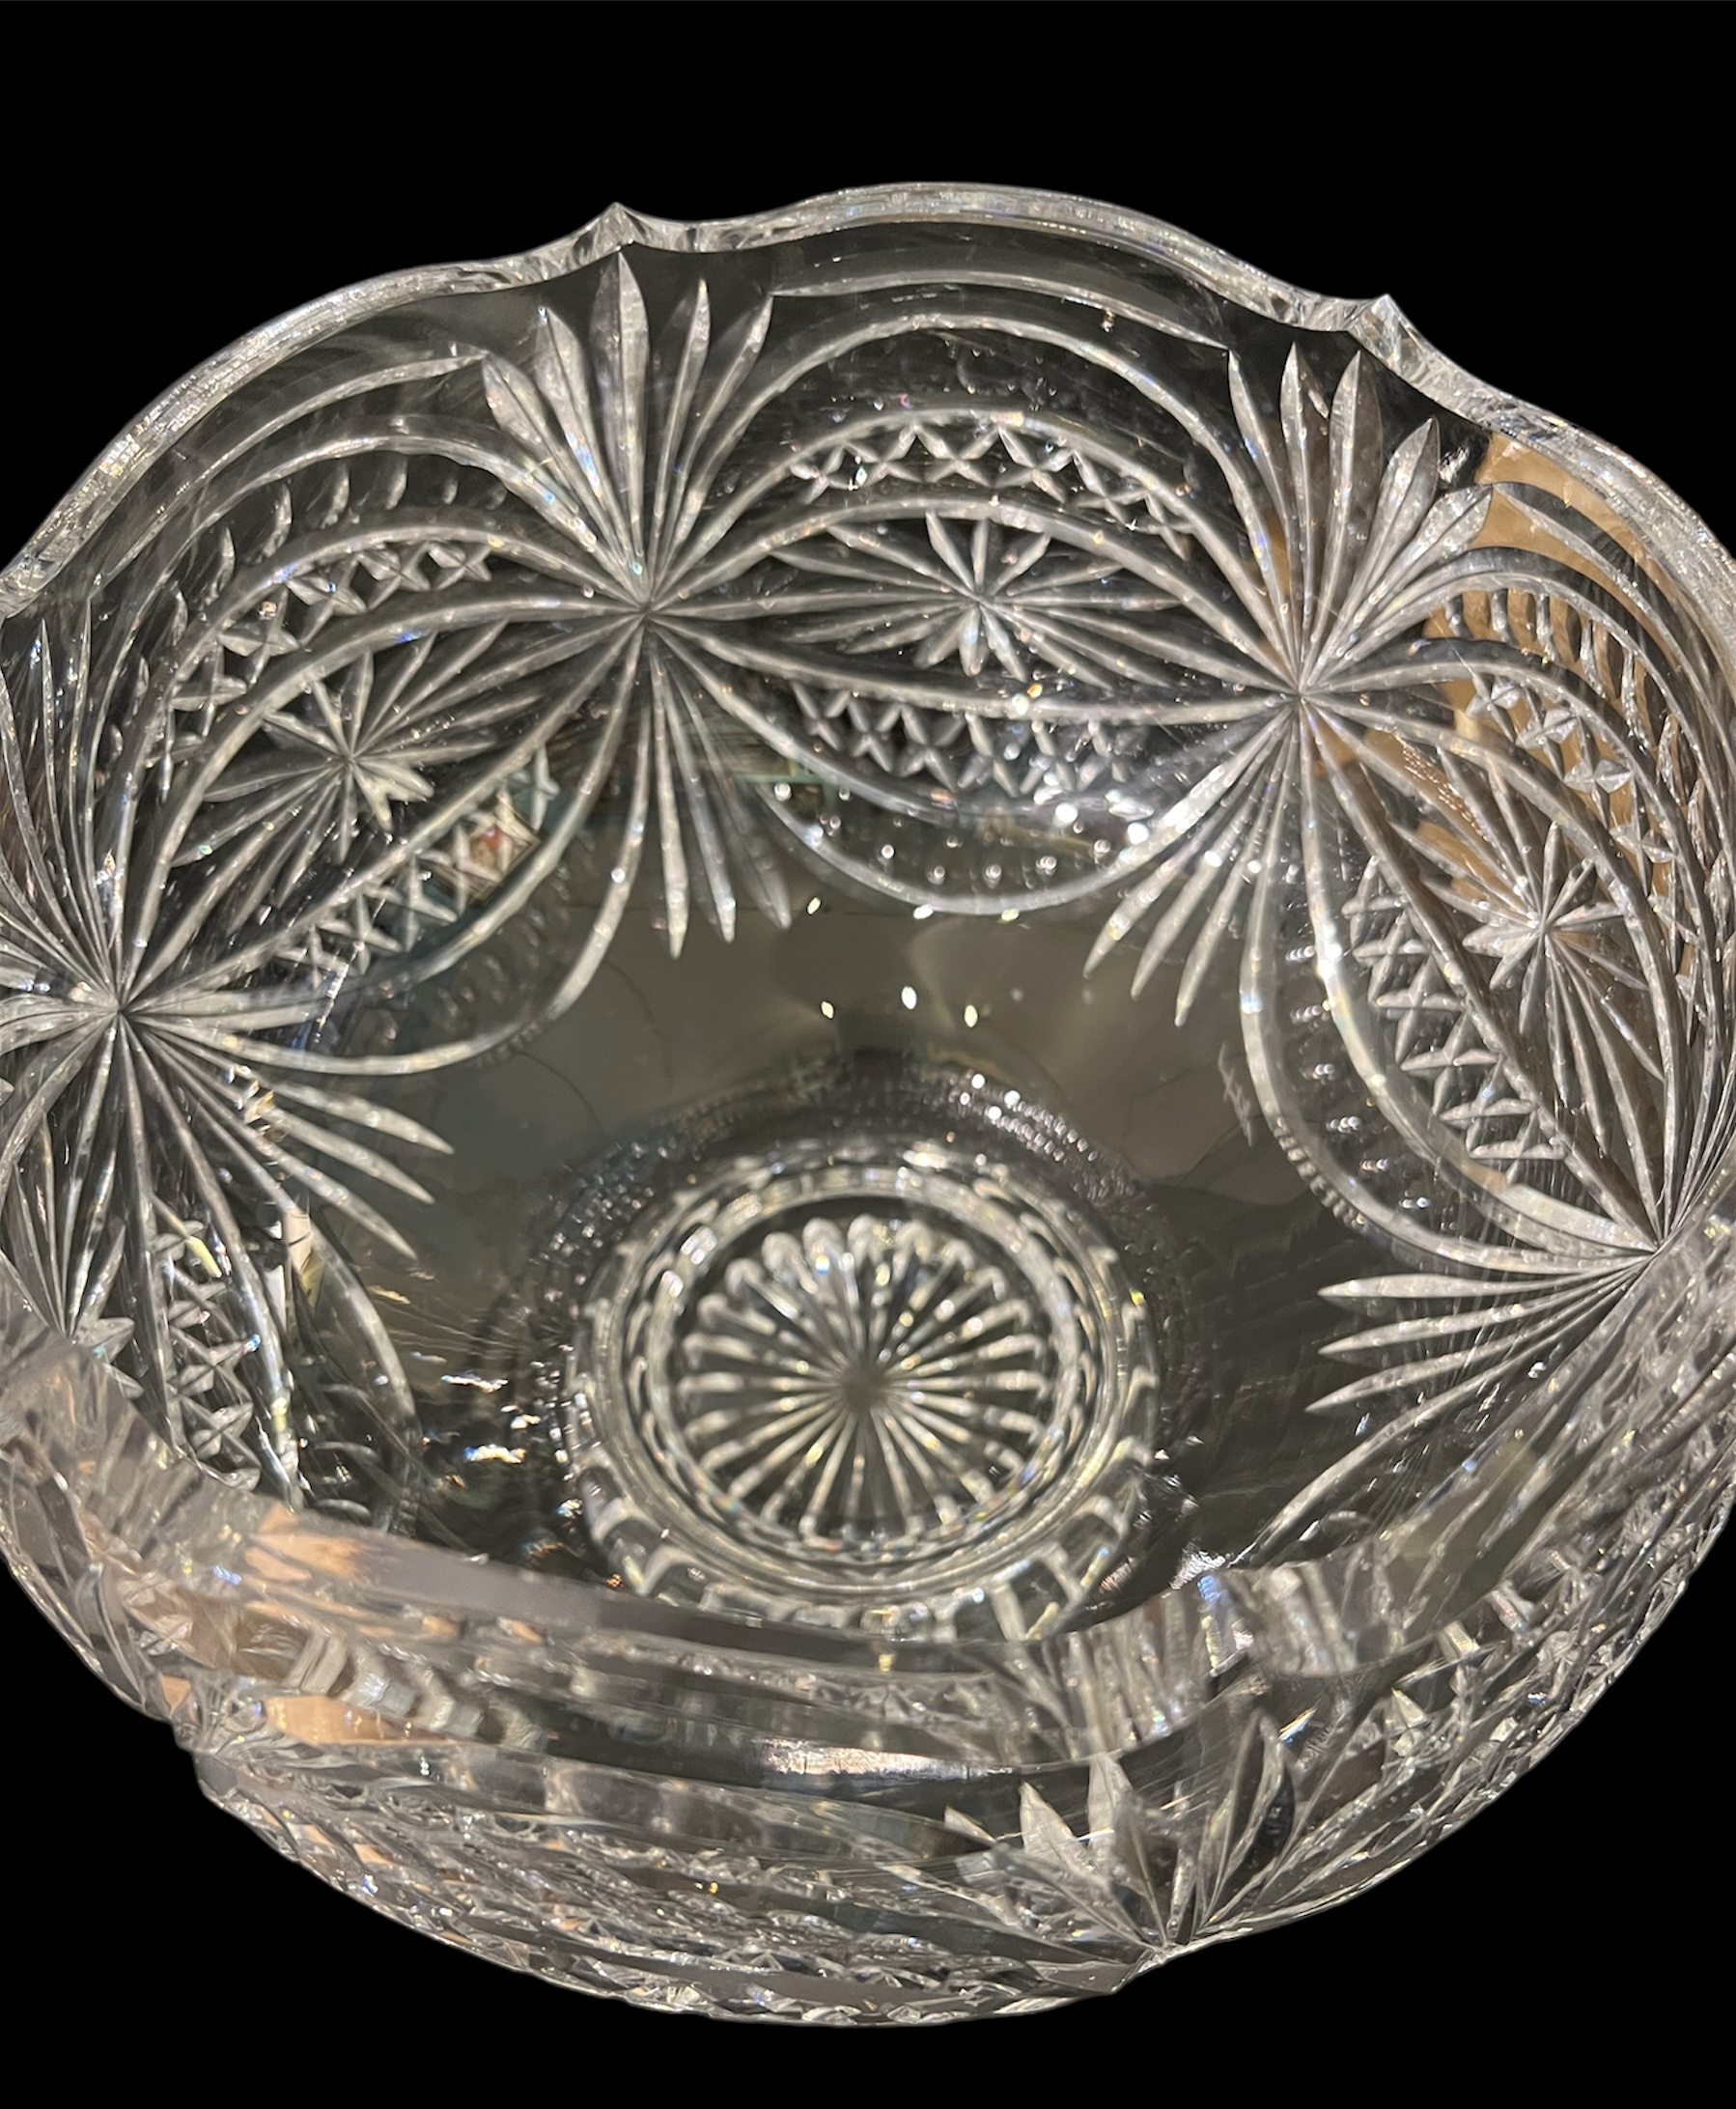 Waterford Crystal Brilliant Cut Footed Bowl